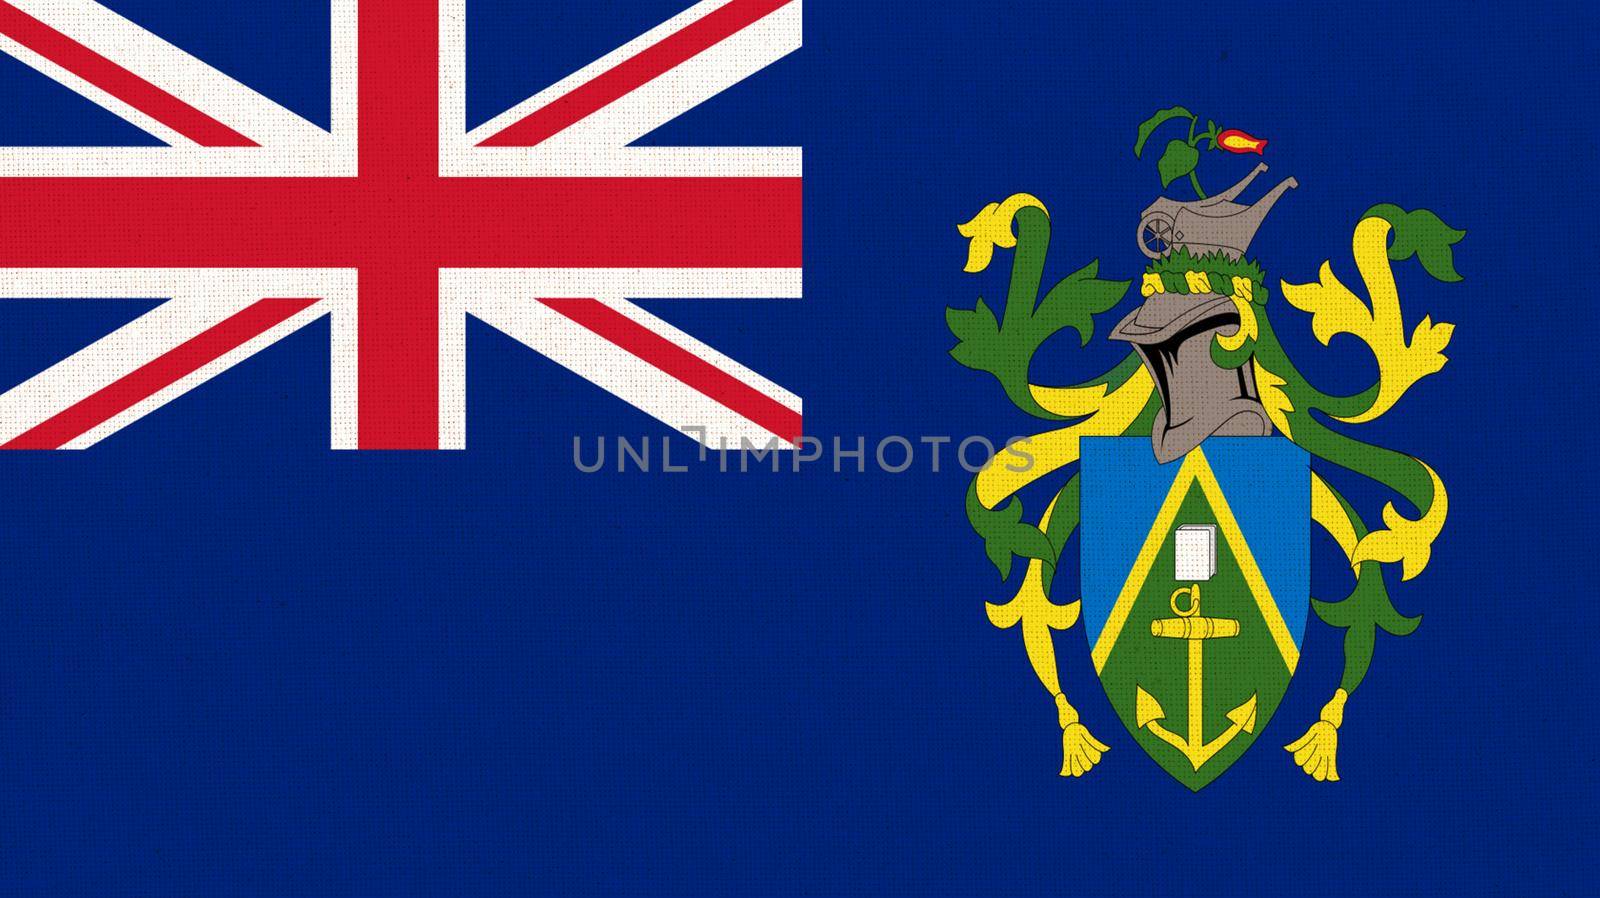 Flag of Pitcairn Islands. Pitcairn Islands flag on fabric surface. Fabric texture. National symbol. Country in Oceania. Pitcairn, Henderson, Ducie and Oeno Islands